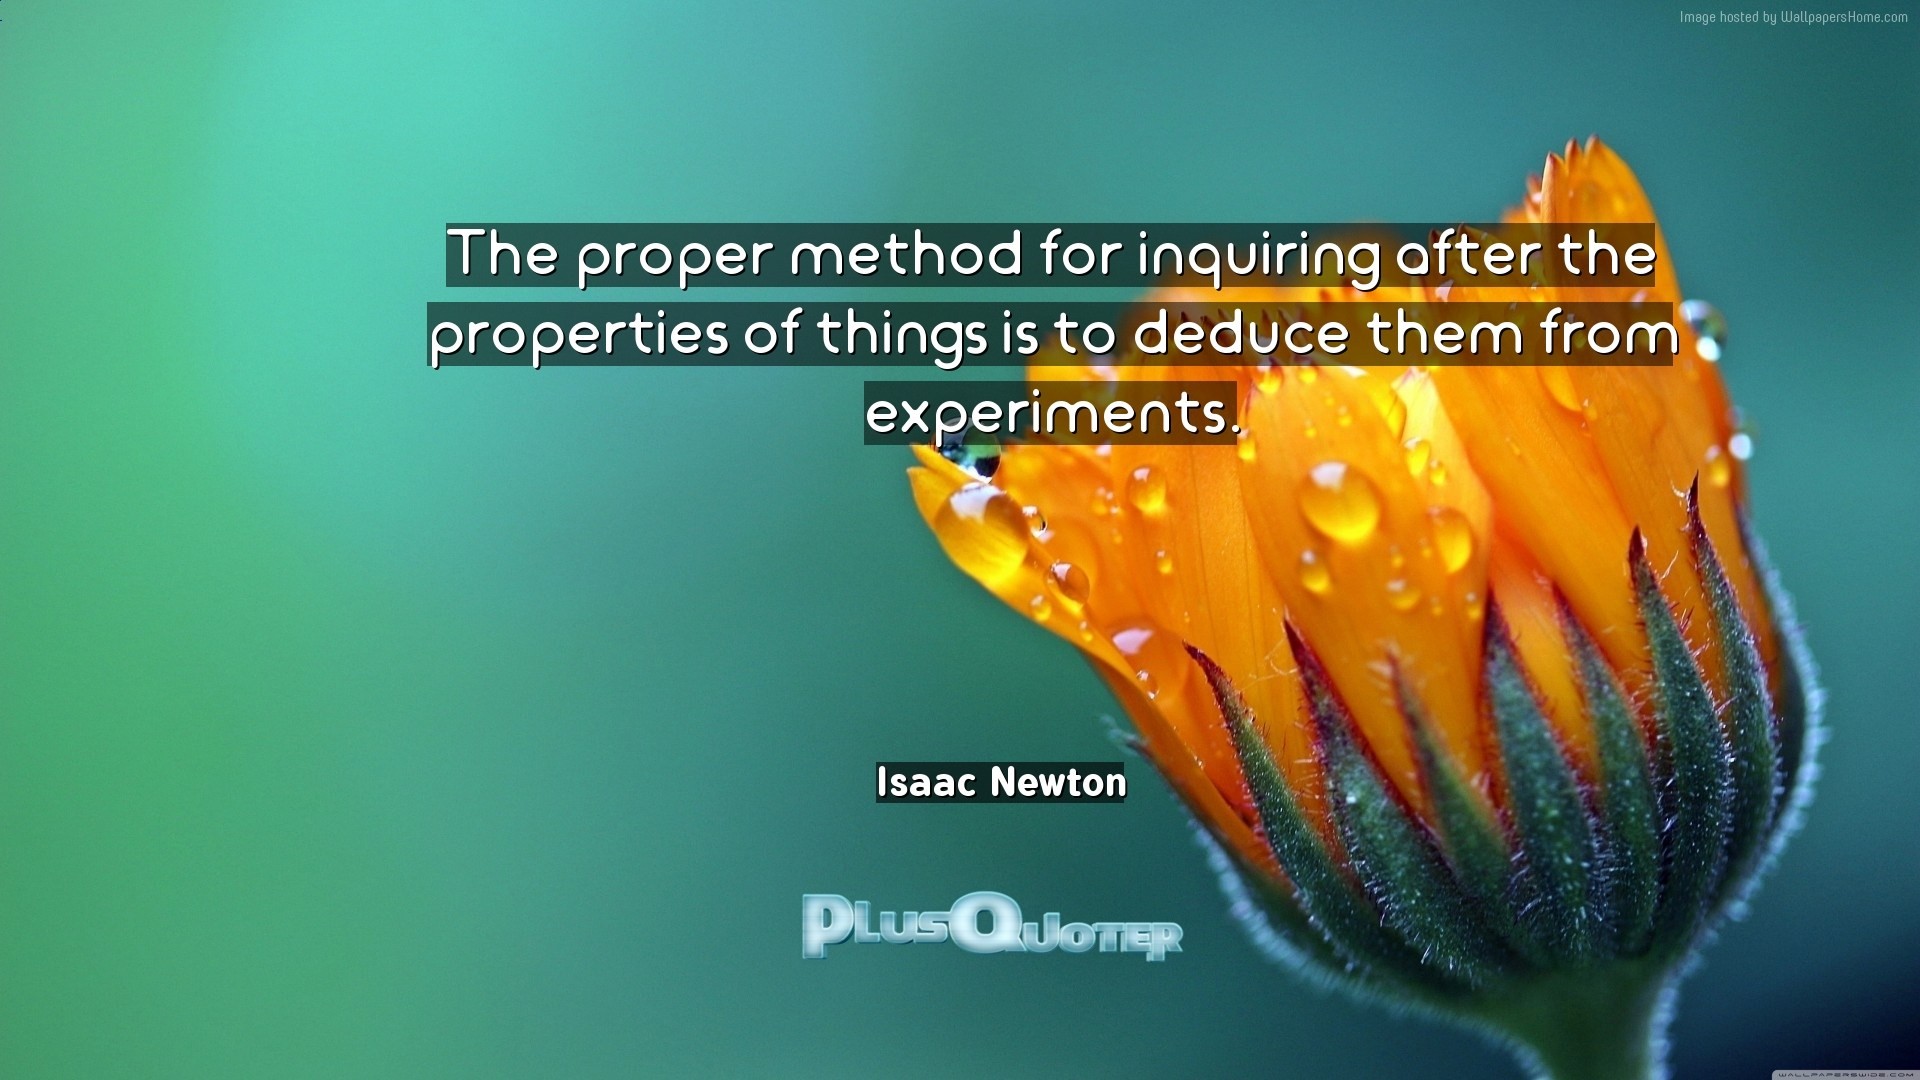 1920x1080 Download Wallpaper with inspirational Quotes- "The proper method for  inquiring after the properties of